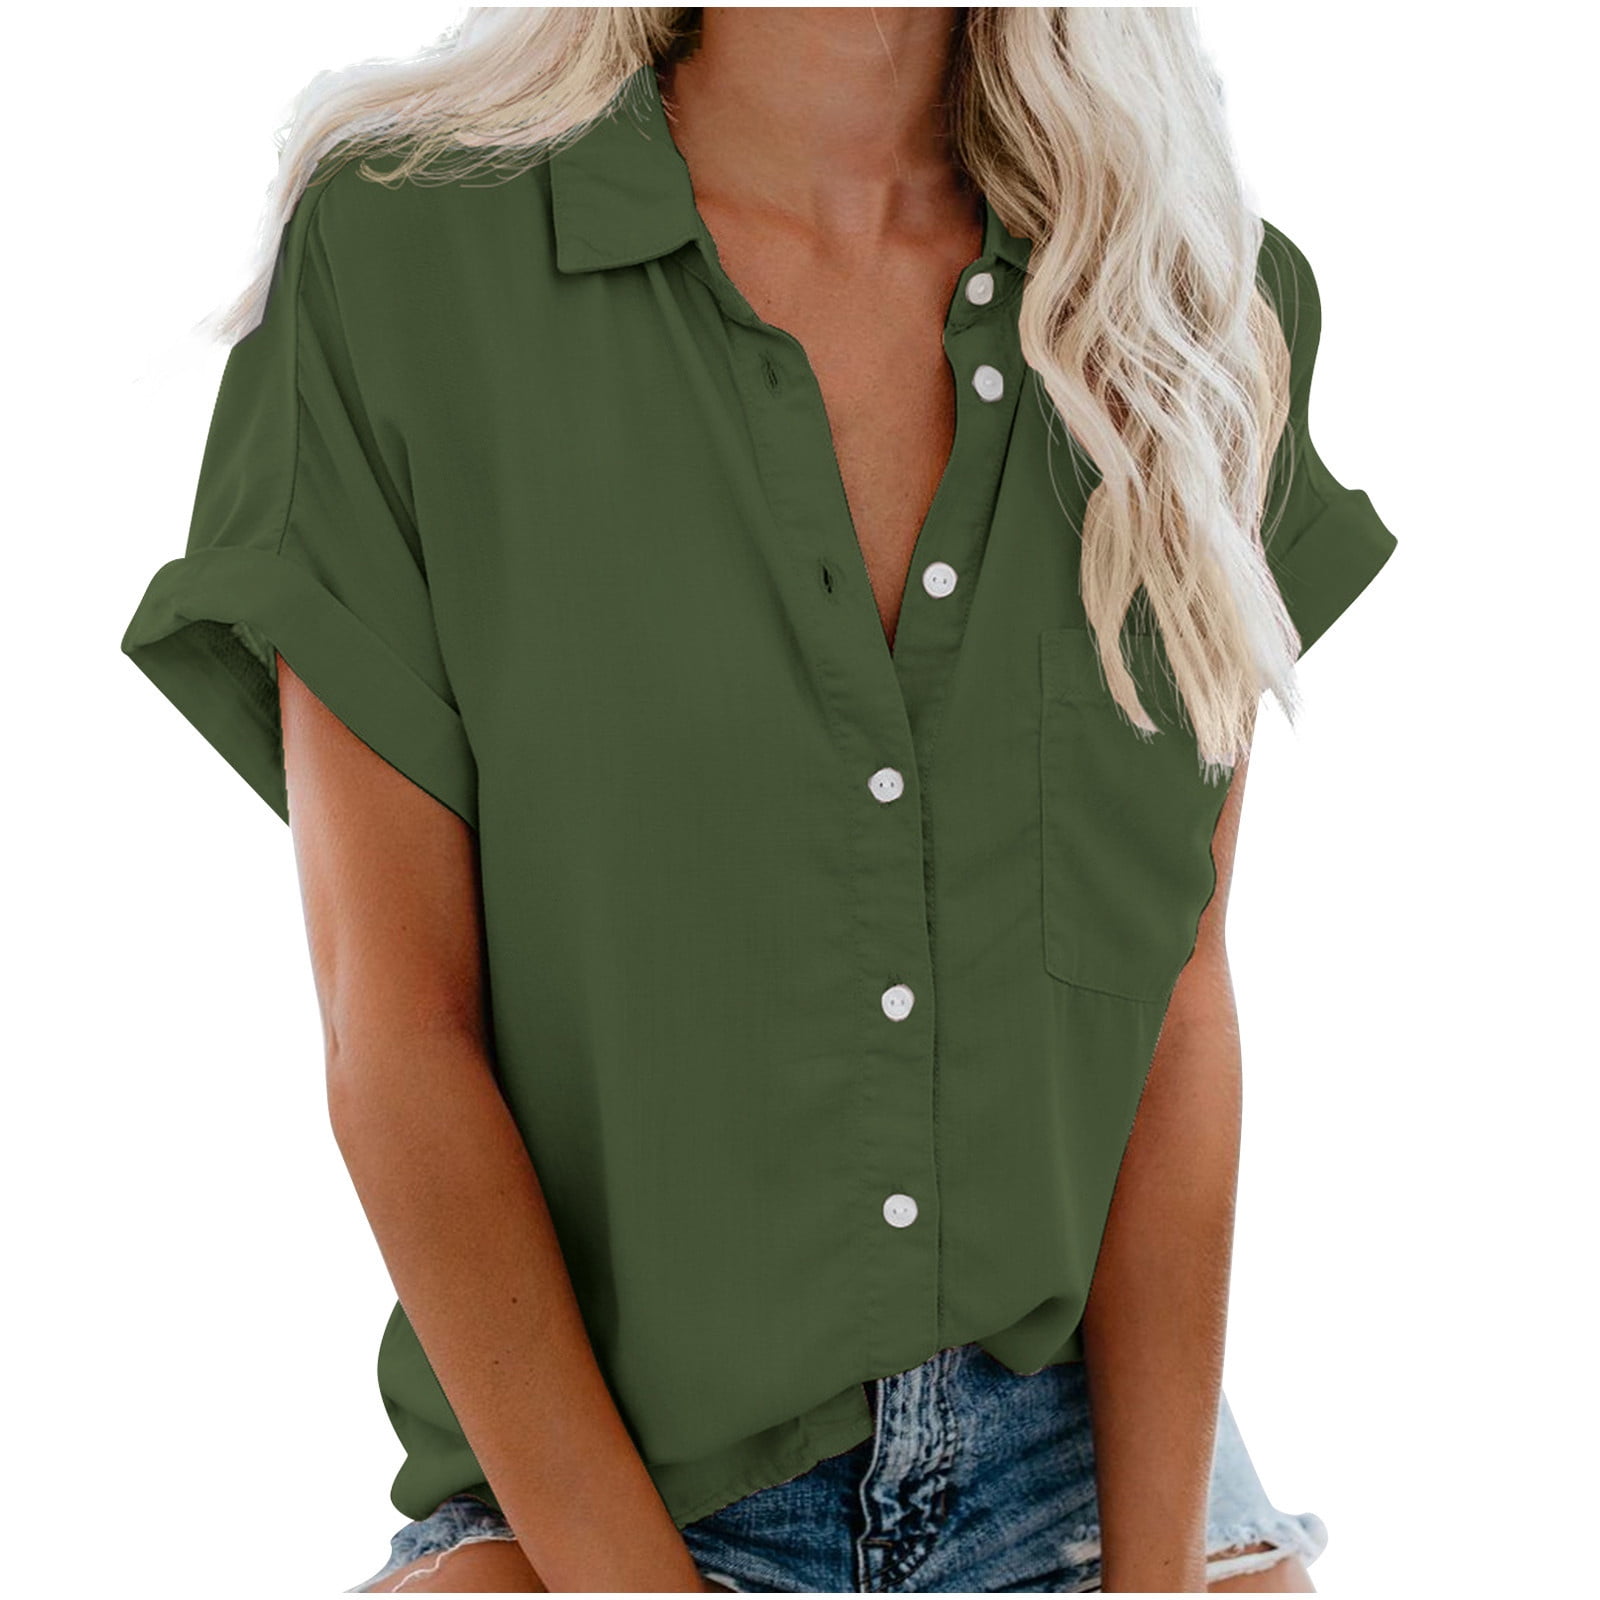  DESKABLY Summer Tunic Tops for Women Casual Loose Tummy Control  Shirts Trendy Short Sleeve Plus Size Round Neck Blouses Army Green : Sports  & Outdoors